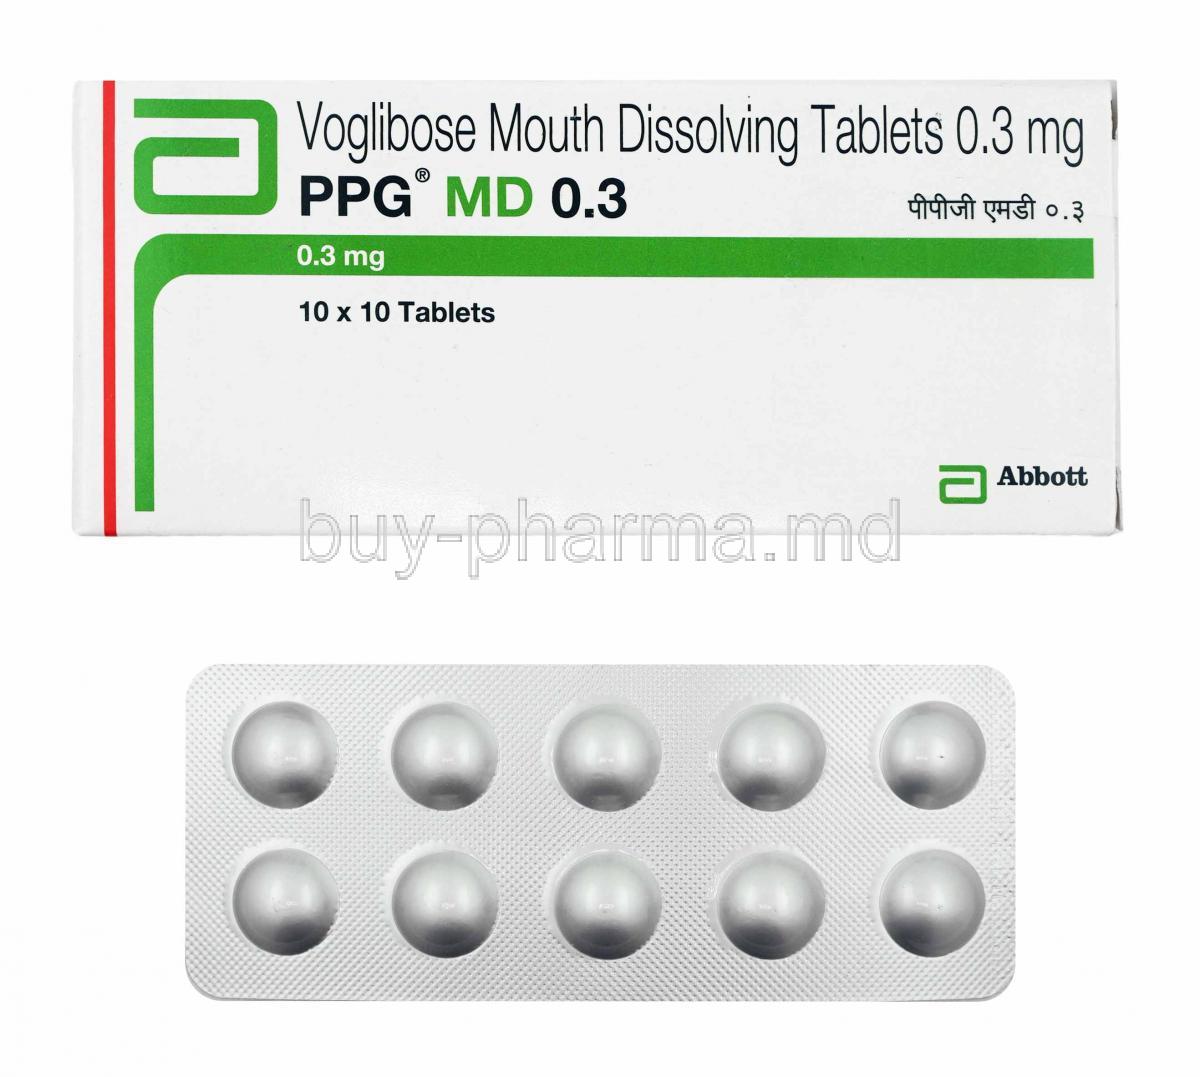 PPG MD, Voglibose 0.3mg box and tablets